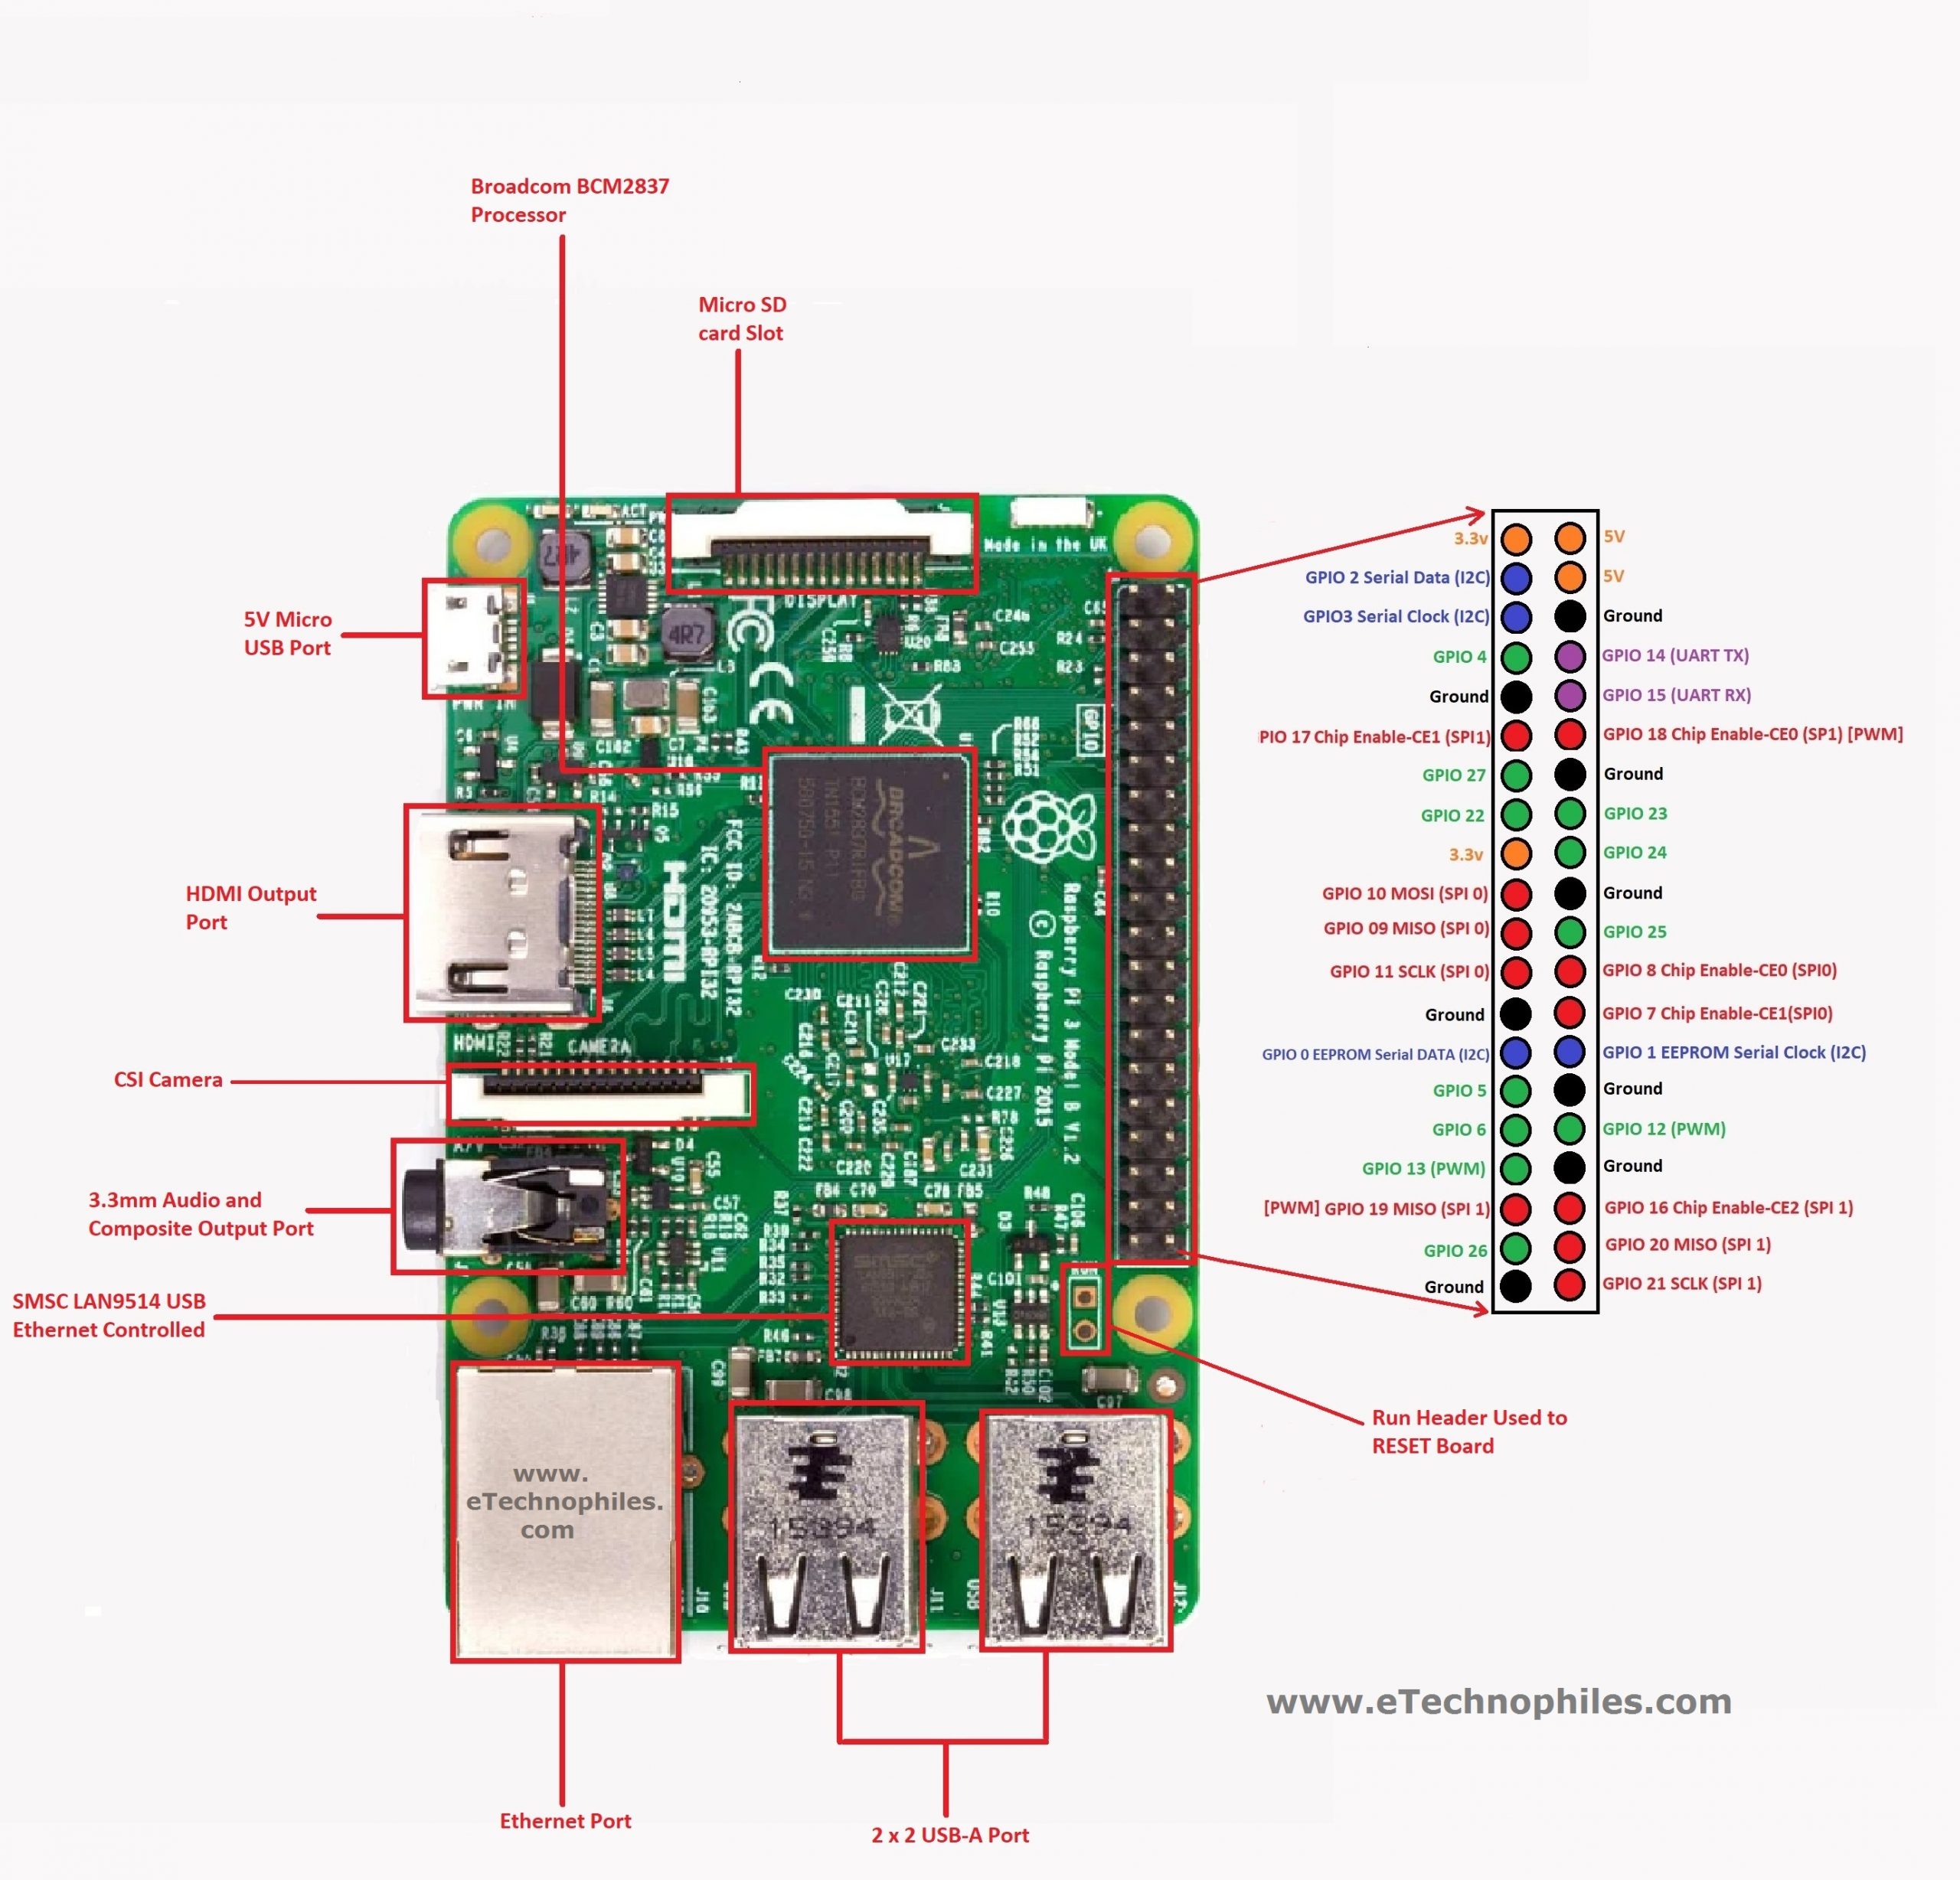 tough weekend bite Raspberry Pi 3 GPIO Pinout and Specs in detail (Model B)